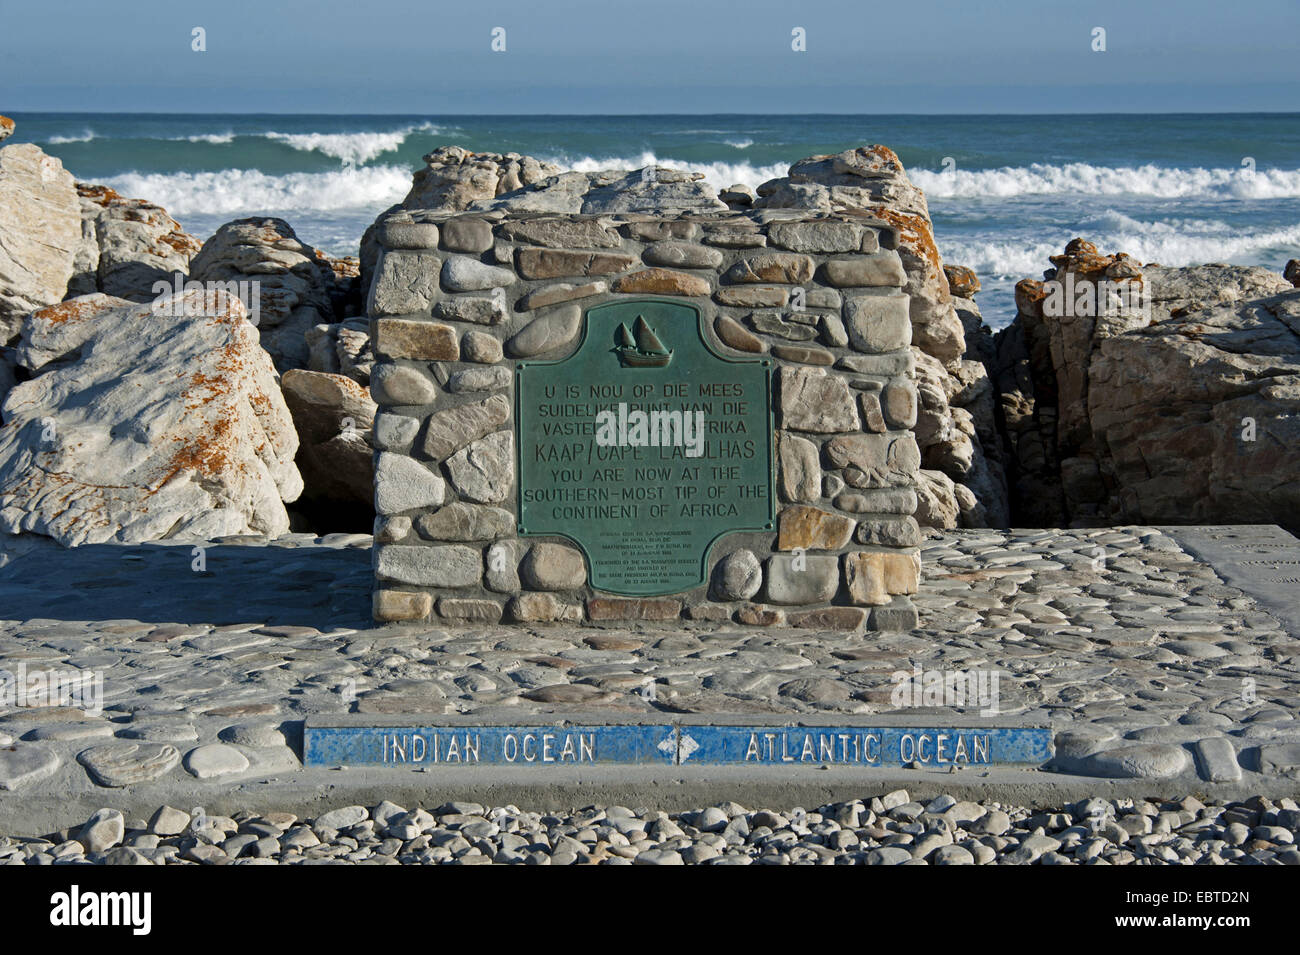 boundary stone marking the border between the Atlantic and the Indian Ocean at Cape Agulhas, the most southerly place in Africa, South Africa, Western Cape, Cape Agulhas National Park Stock Photo